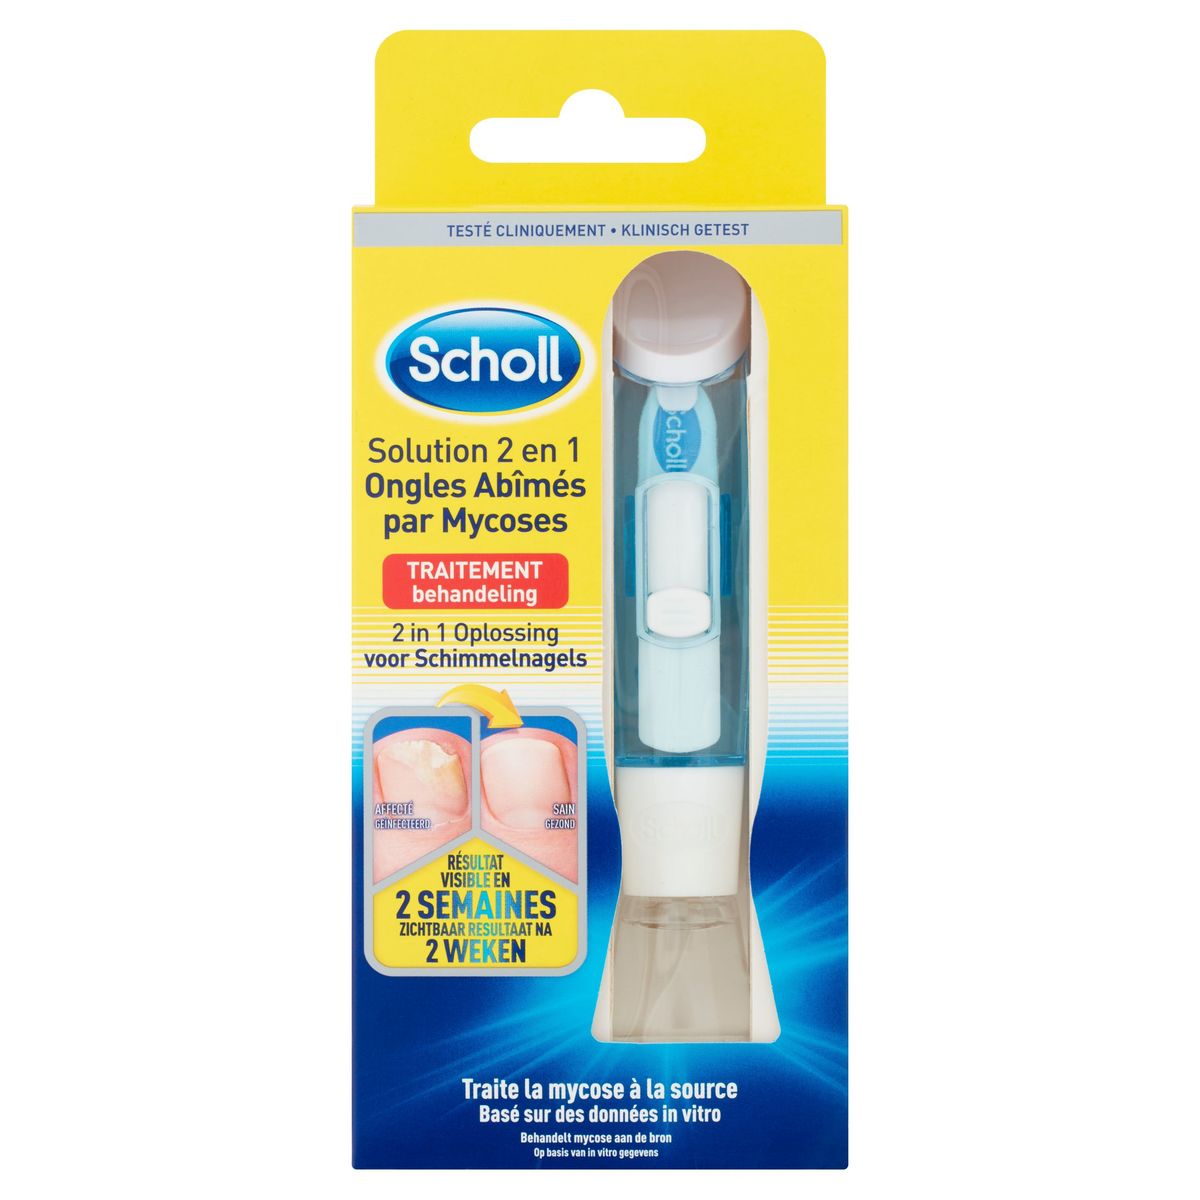 SCHOLL Solution Mycoses des Ongles